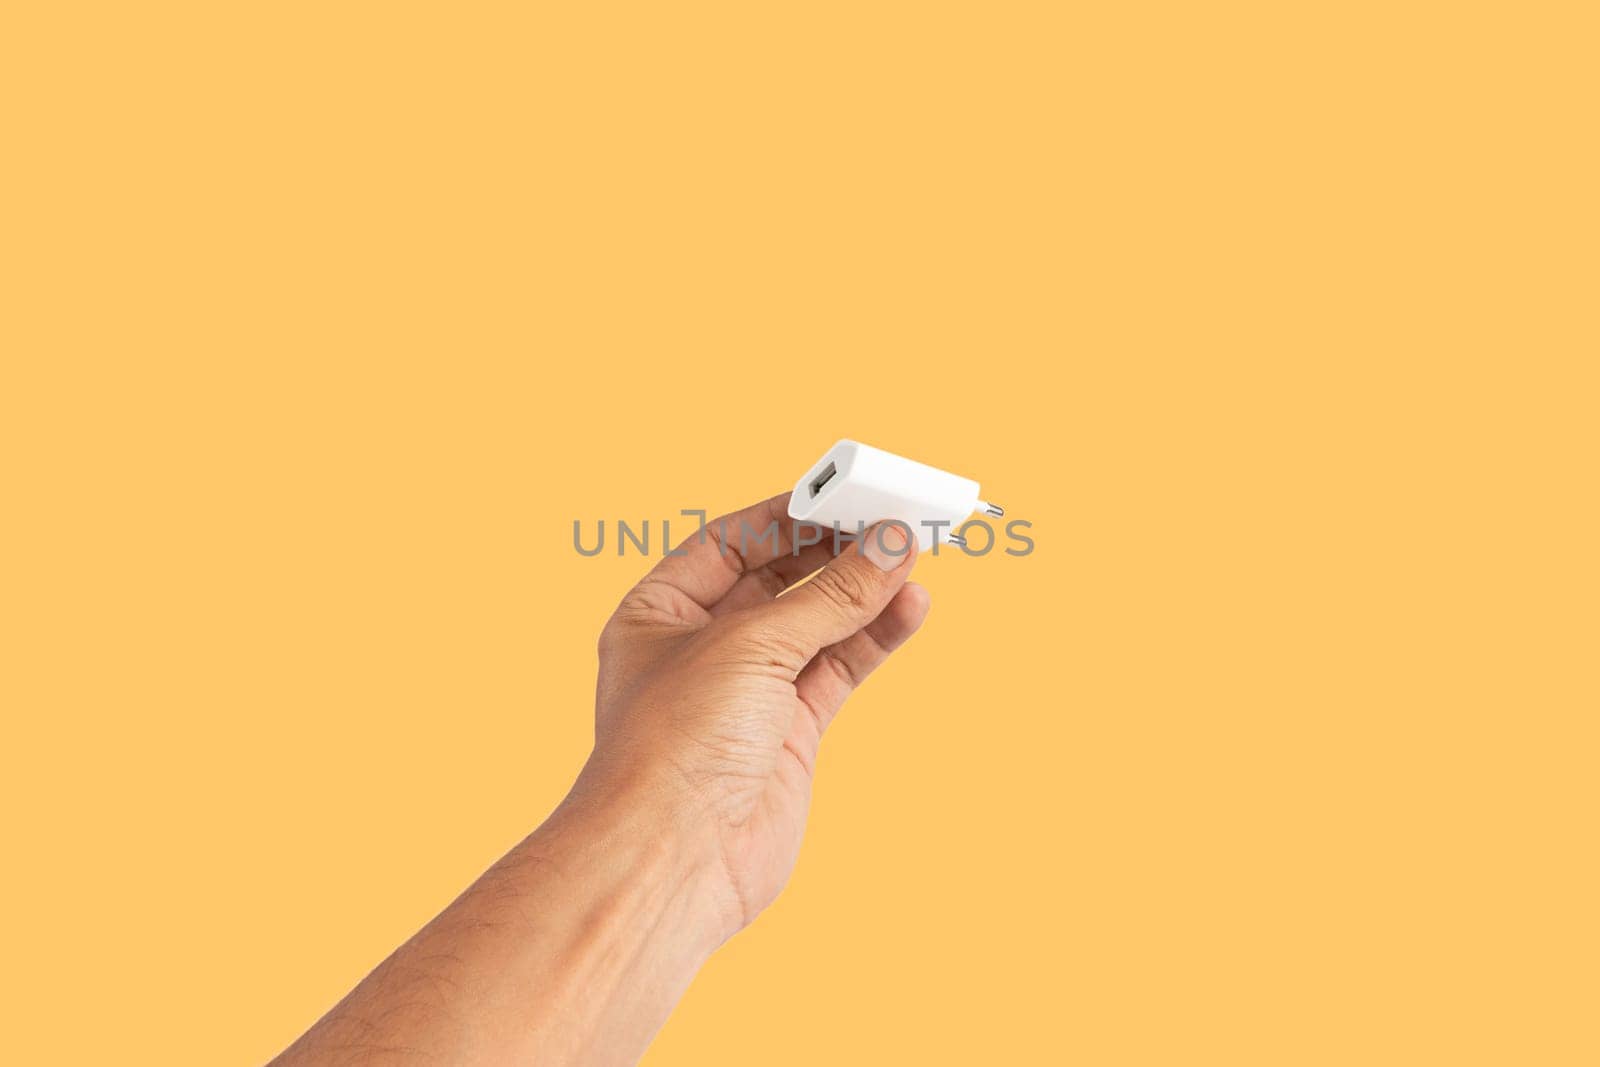 Black male hand holding a USB charger plug isolated on yellow background by TropicalNinjaStudio